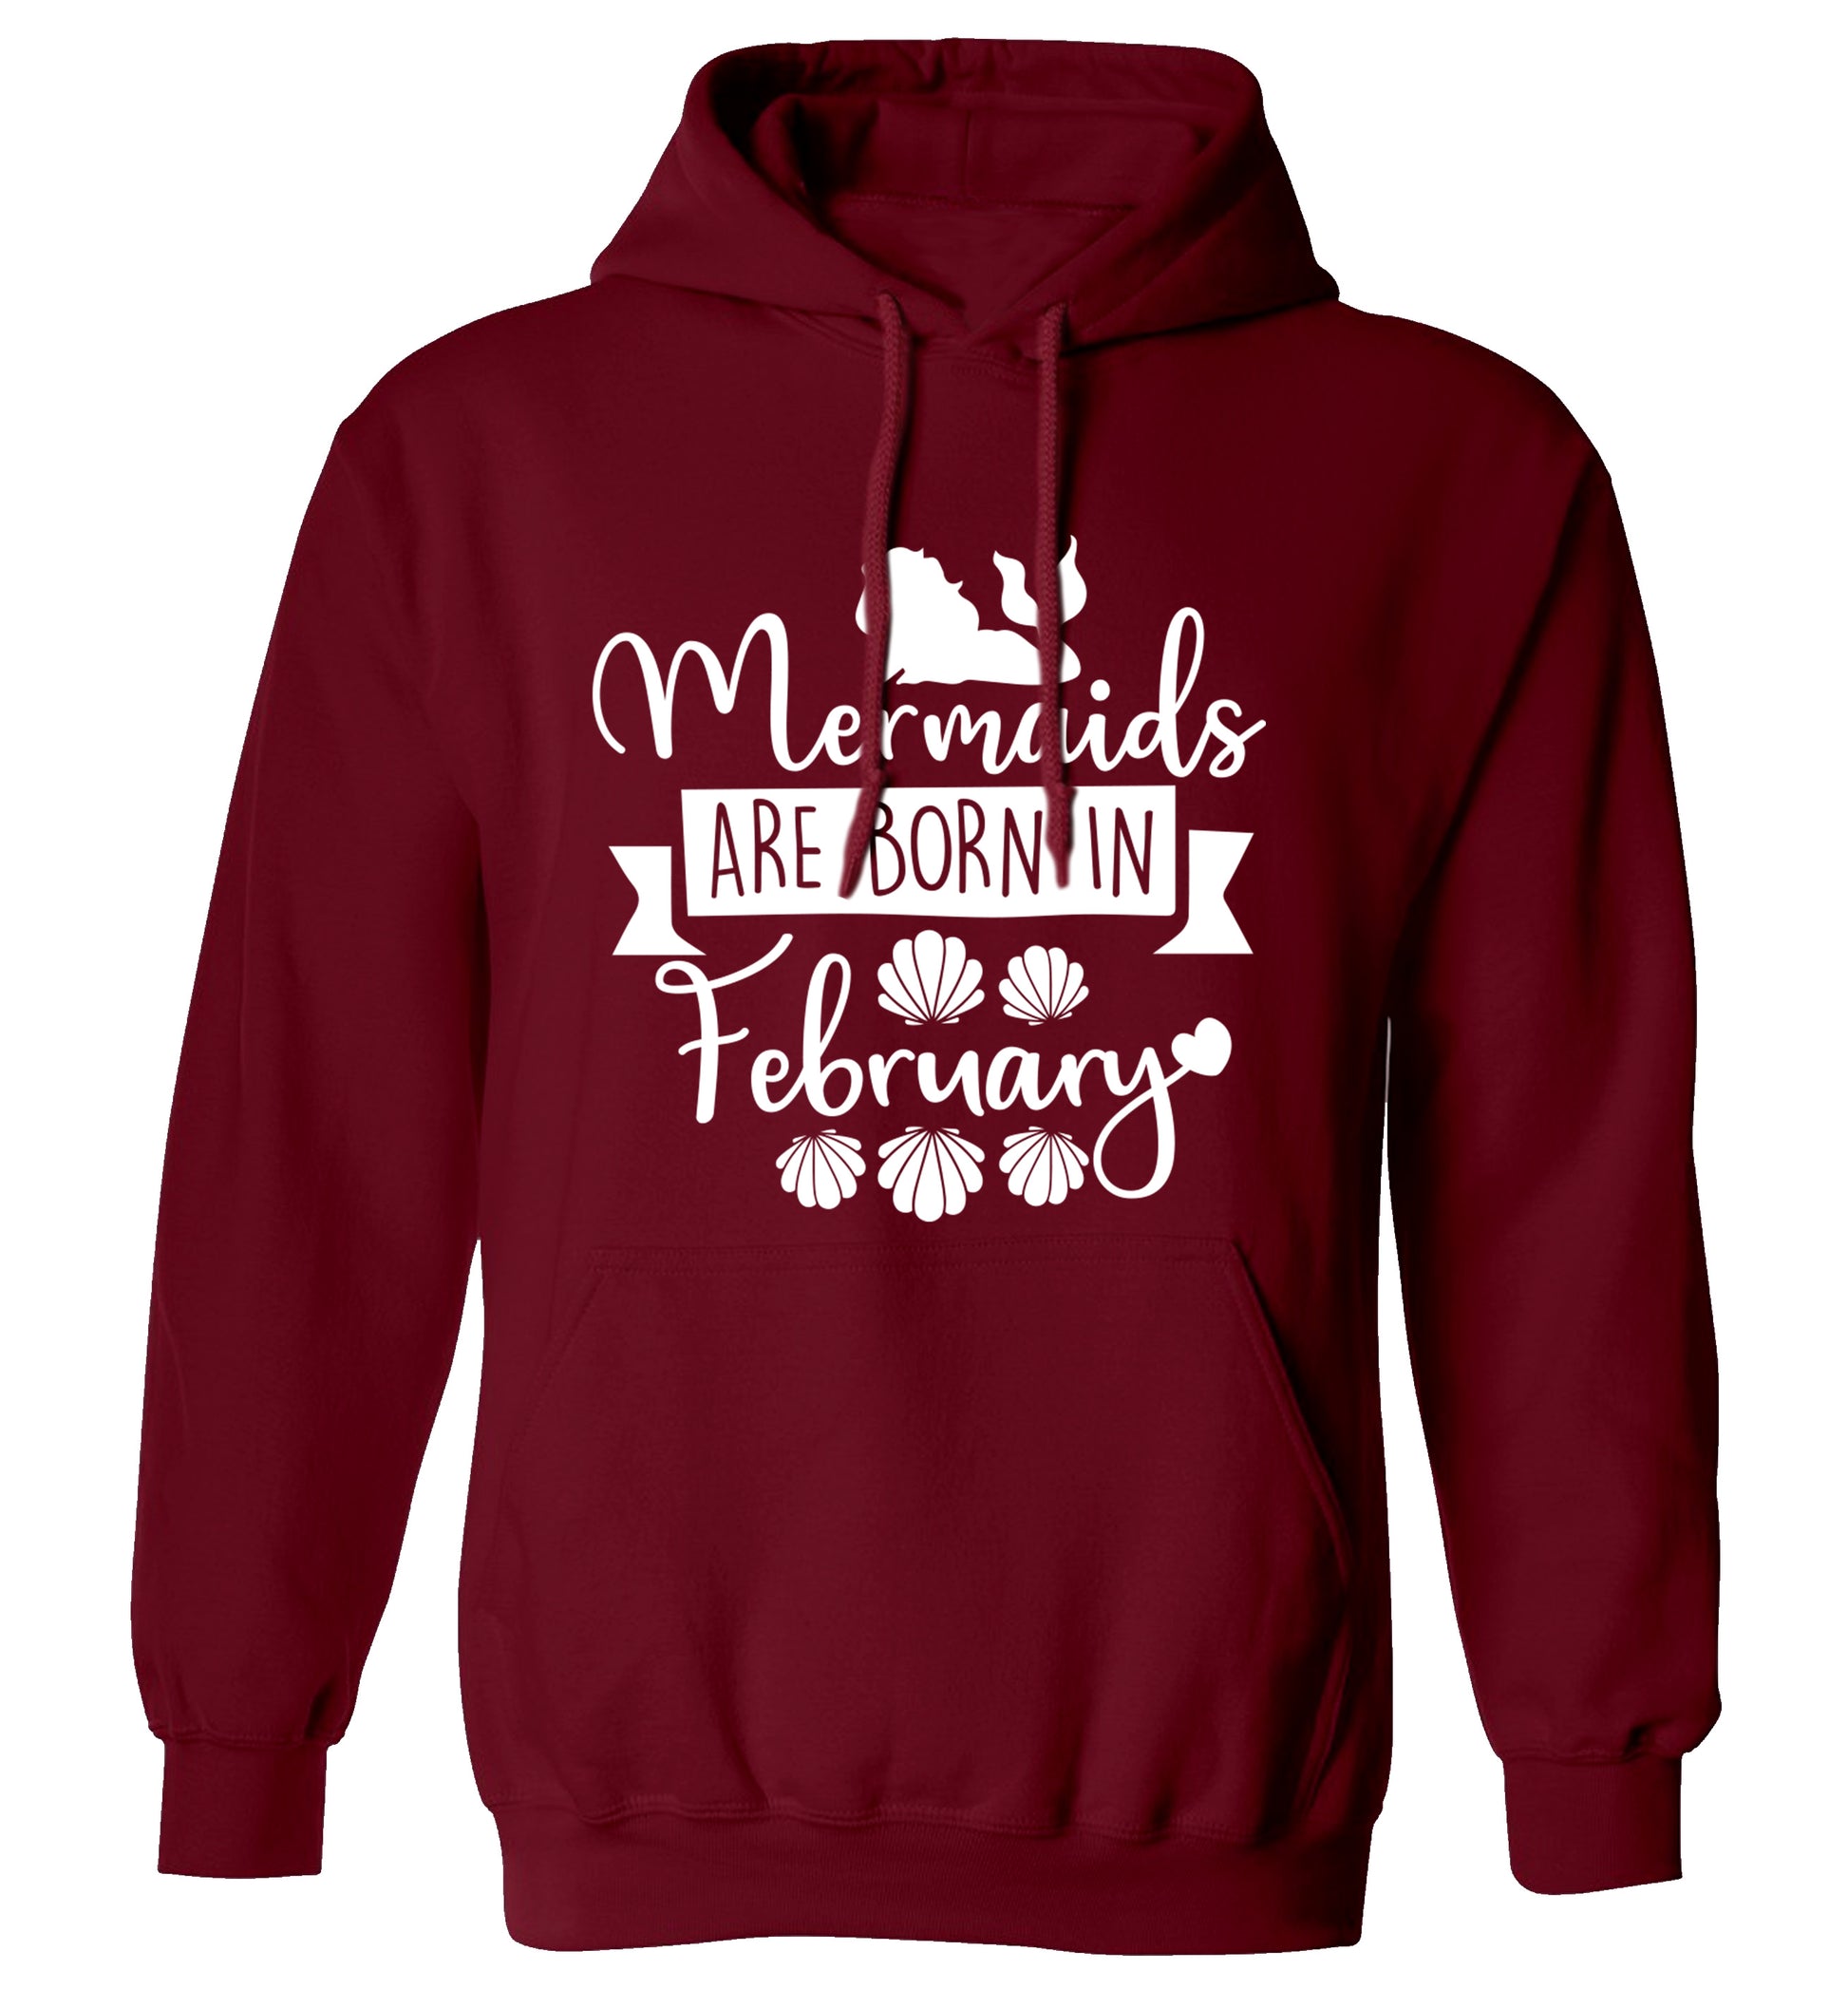 Mermaids are born in February adults unisex maroon hoodie 2XL